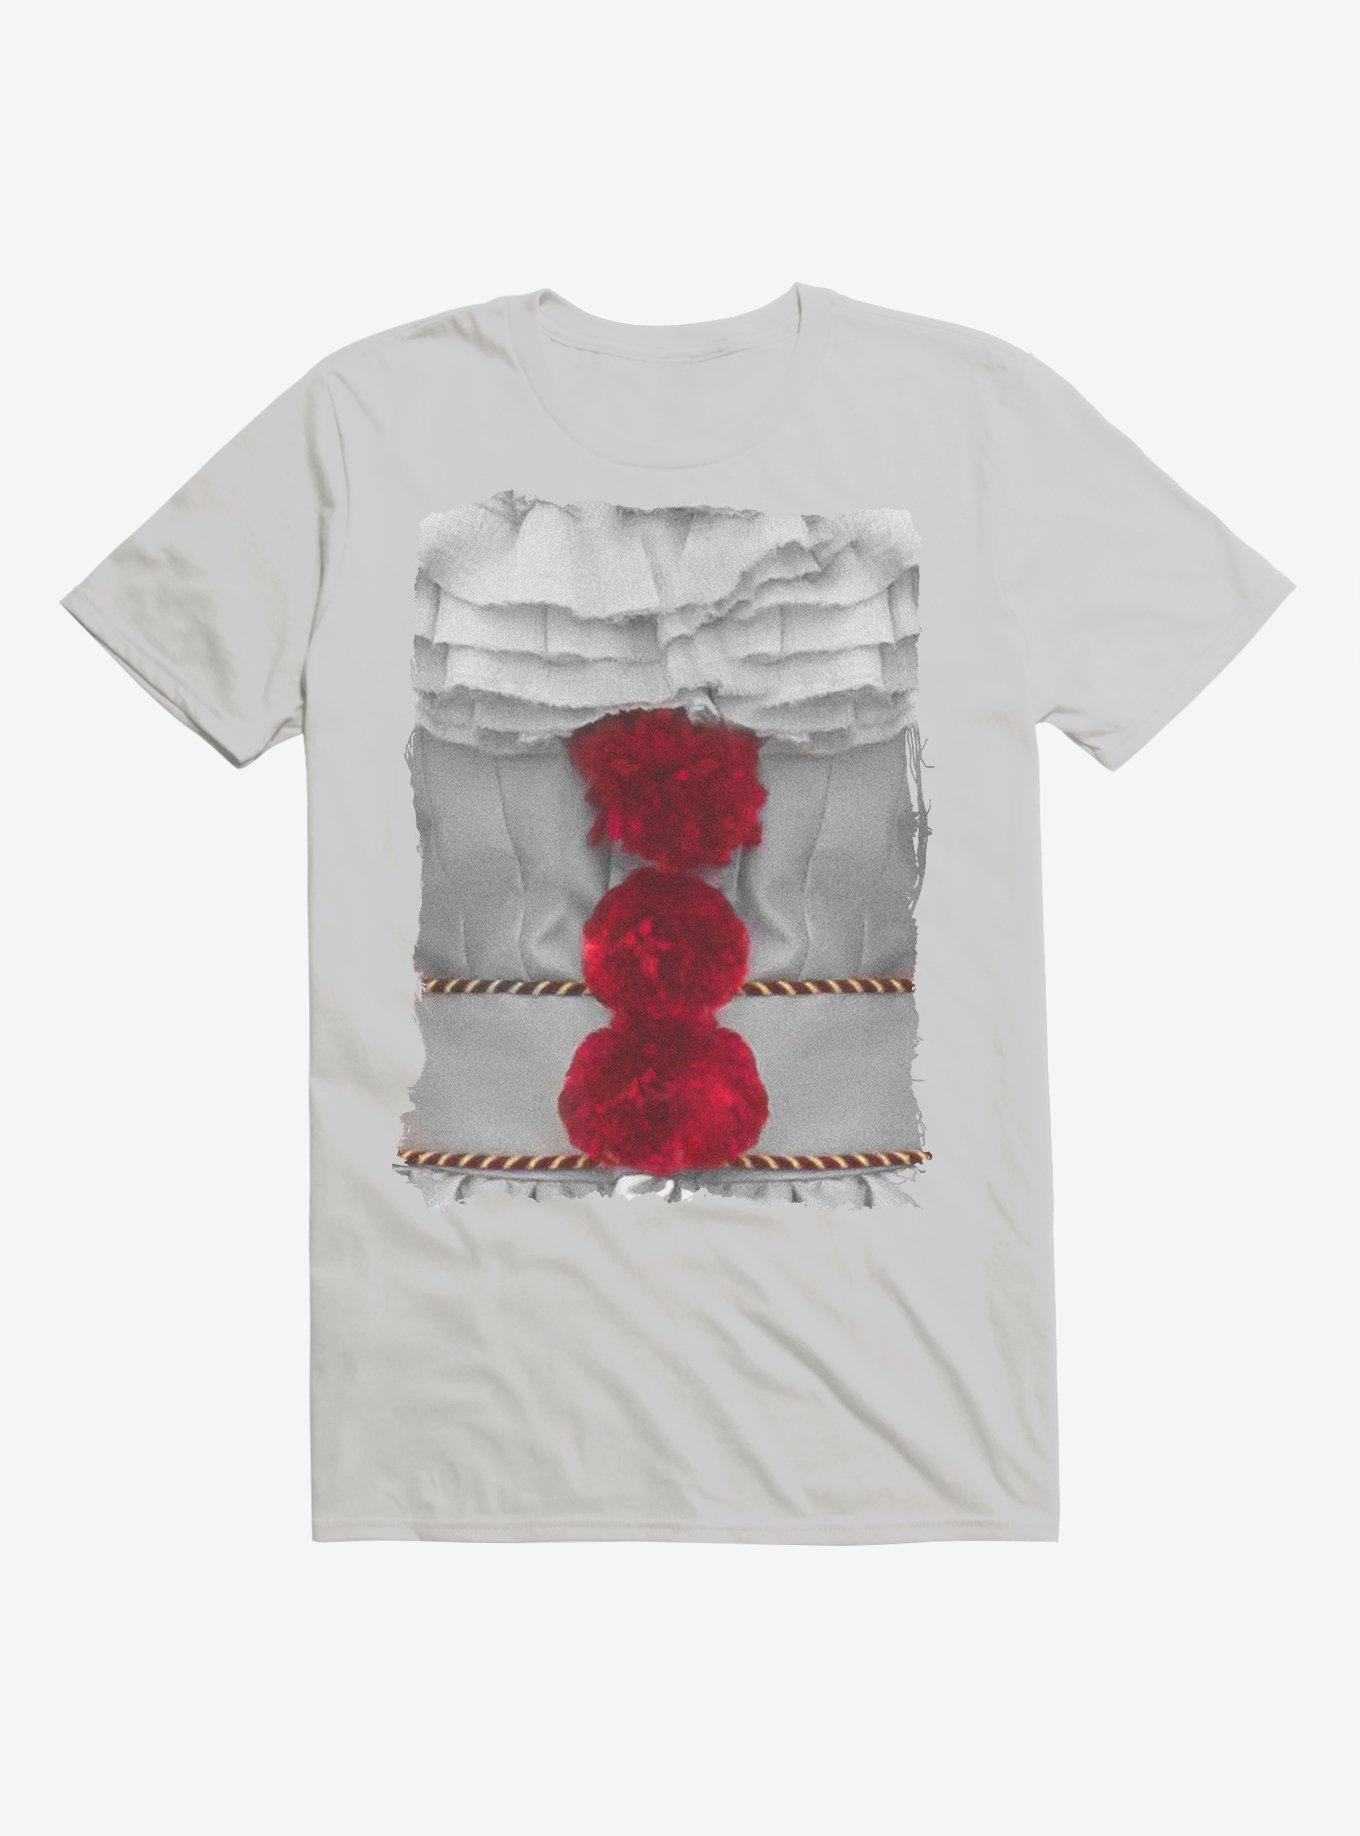 IT 2 Pennywise Cosplay T-Shirt, SILVER, hi-res